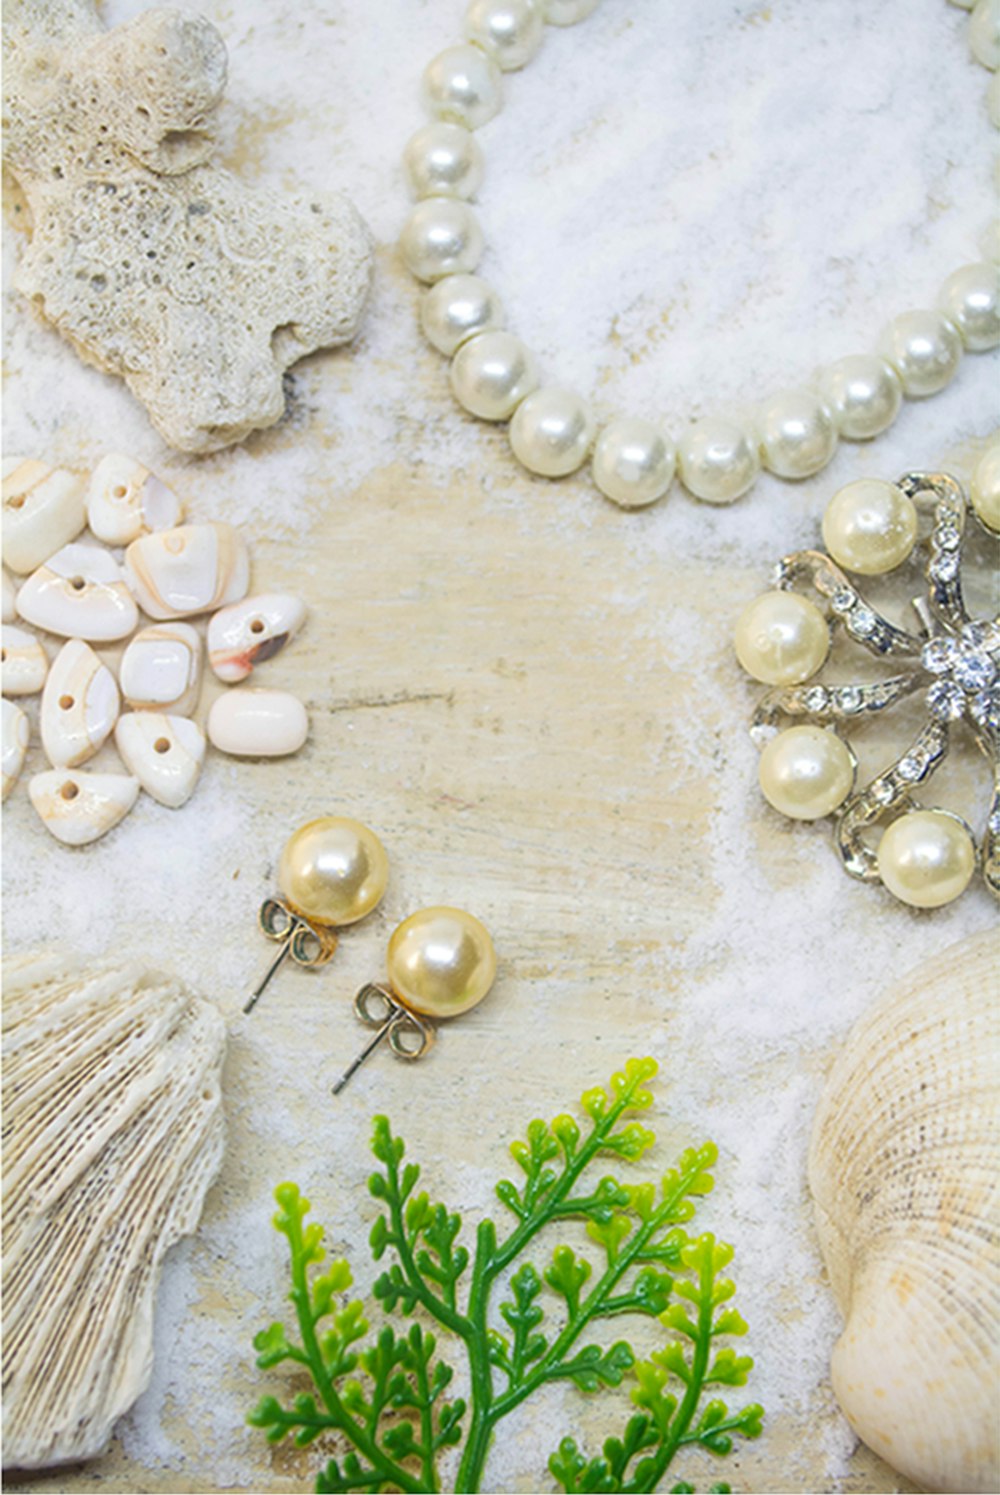 a collection of seashells, pearls, and seaweed